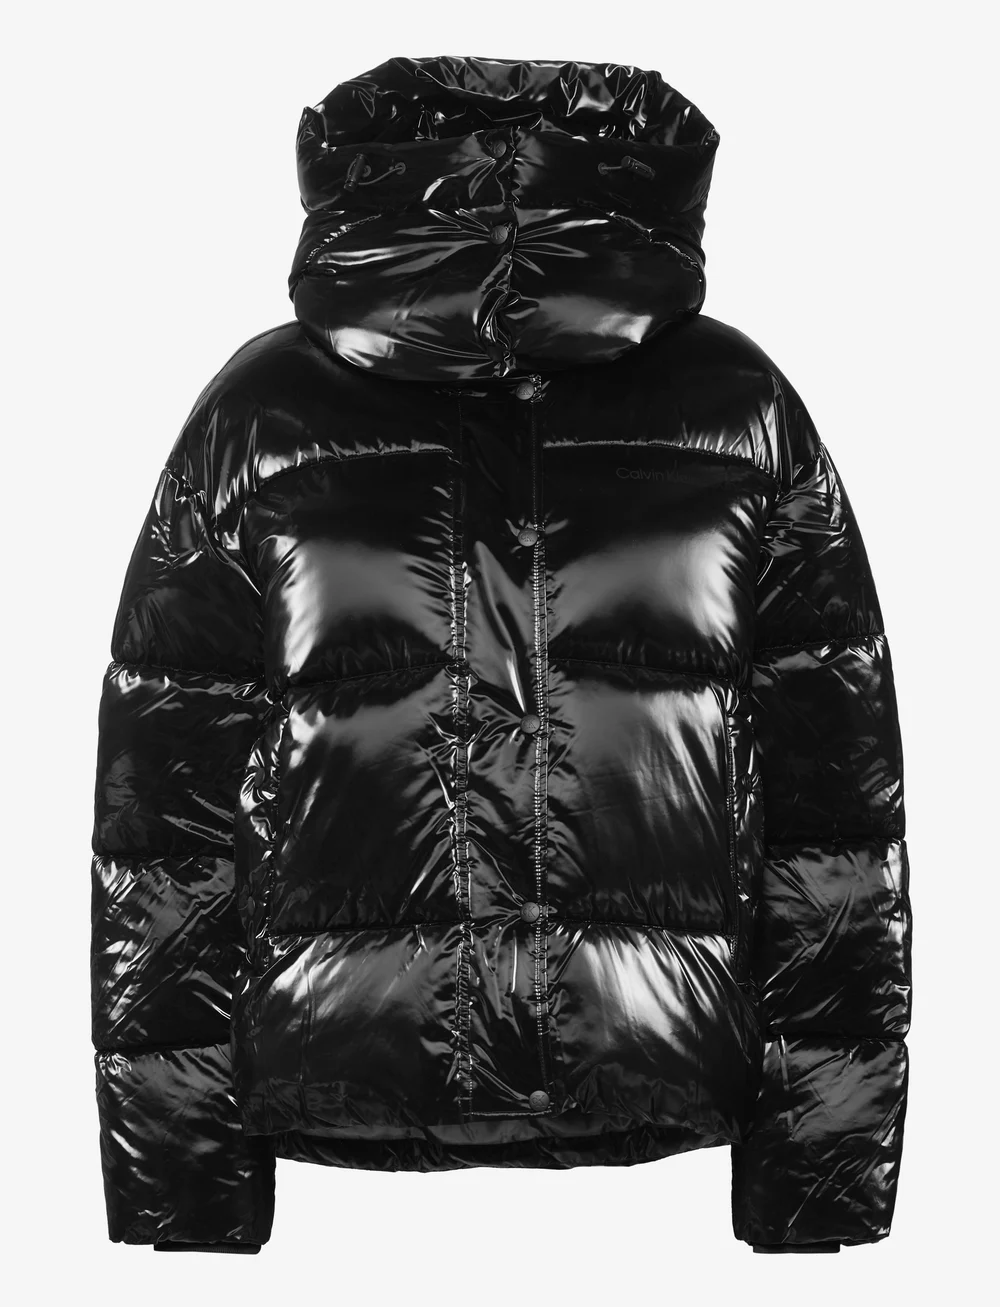 Calvin Klein Jeans High Filled Wide Puffer Jacket - 199.95 €. Buy